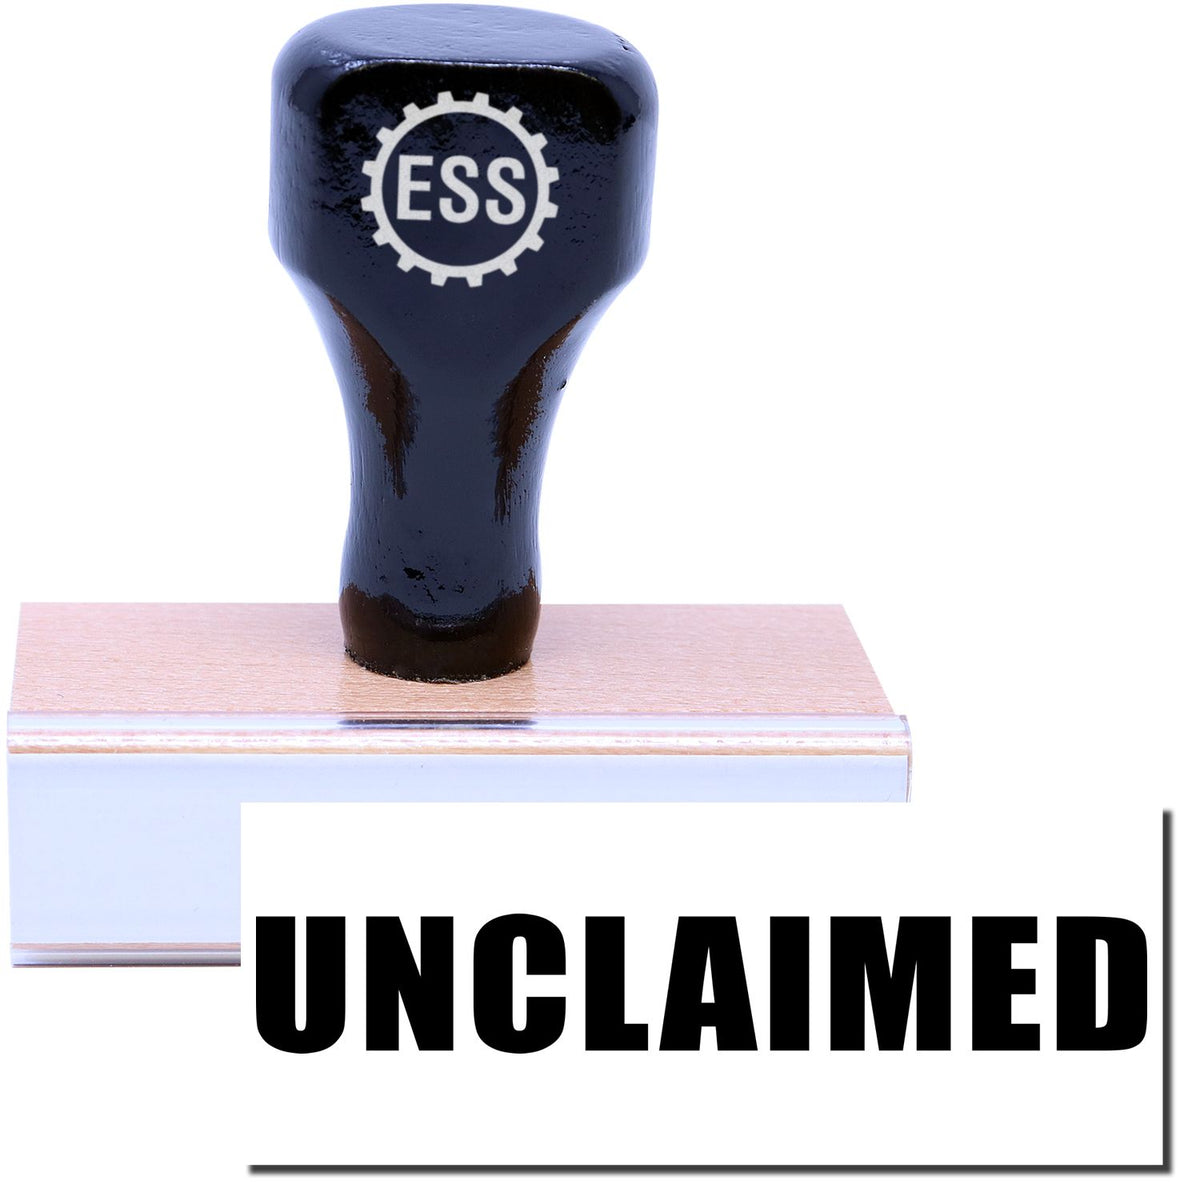 A stock office rubber stamp with a stamped image showing how the text &quot;UNCLAIMED&quot; in a large font is displayed after stamping.